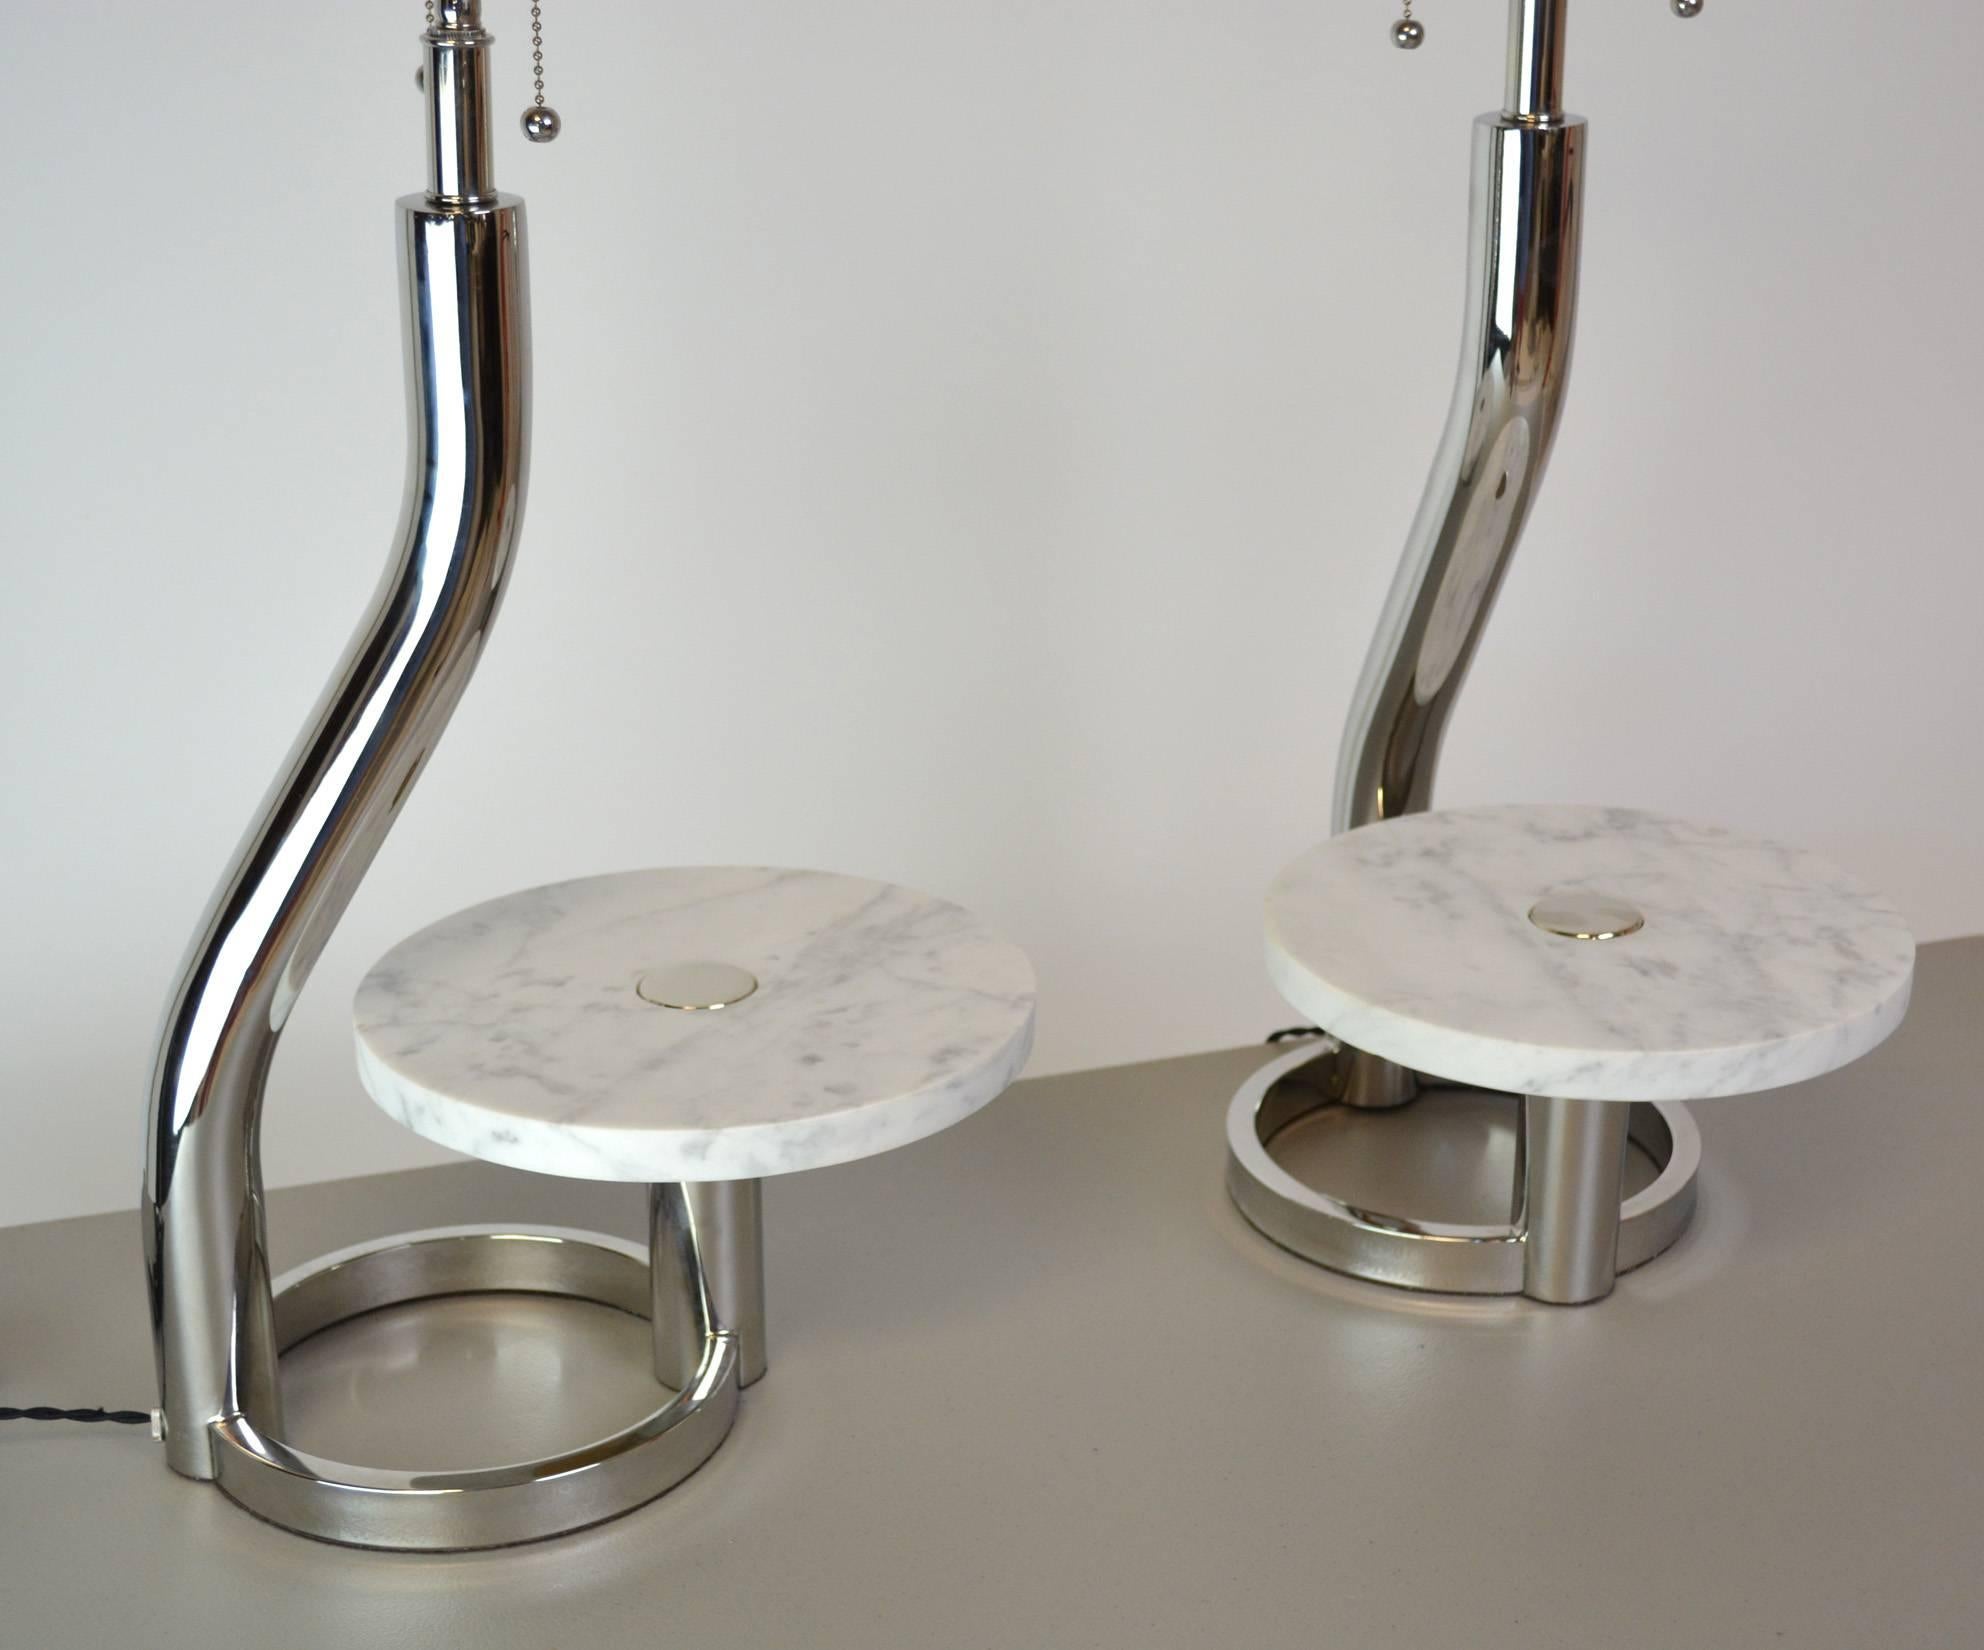 A chic pair of chrome lamps with marble discs that can be used to display objects. Rewired with new double cluster sockets and French braid cloth cord. Shades for display only.